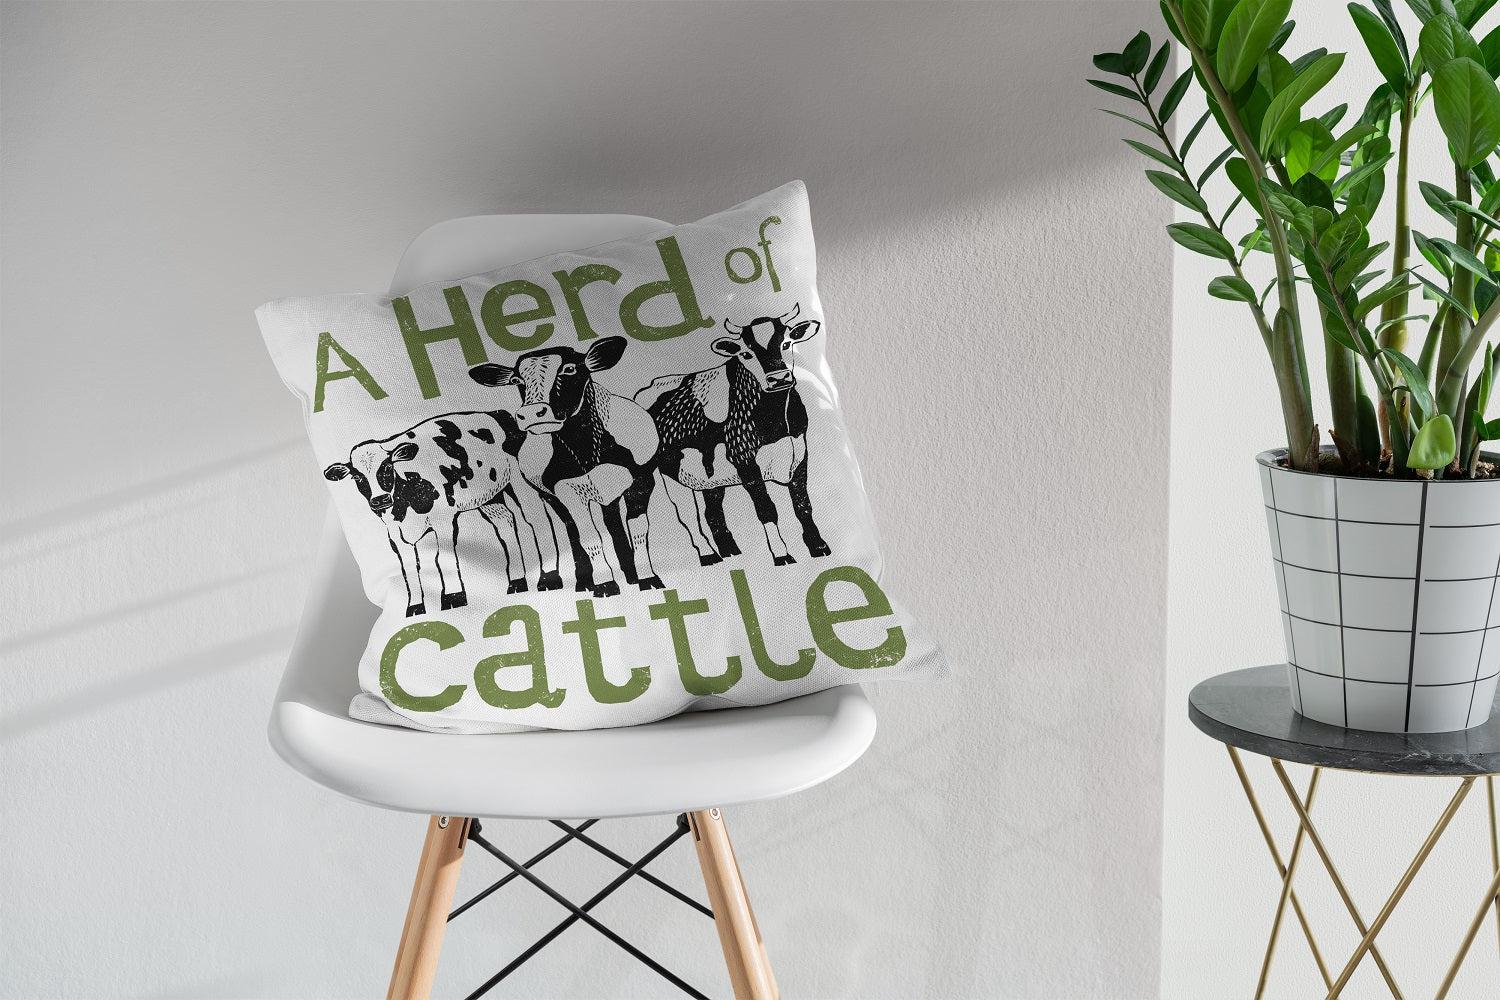 Herd of Cattle - Collective Noun Cushion